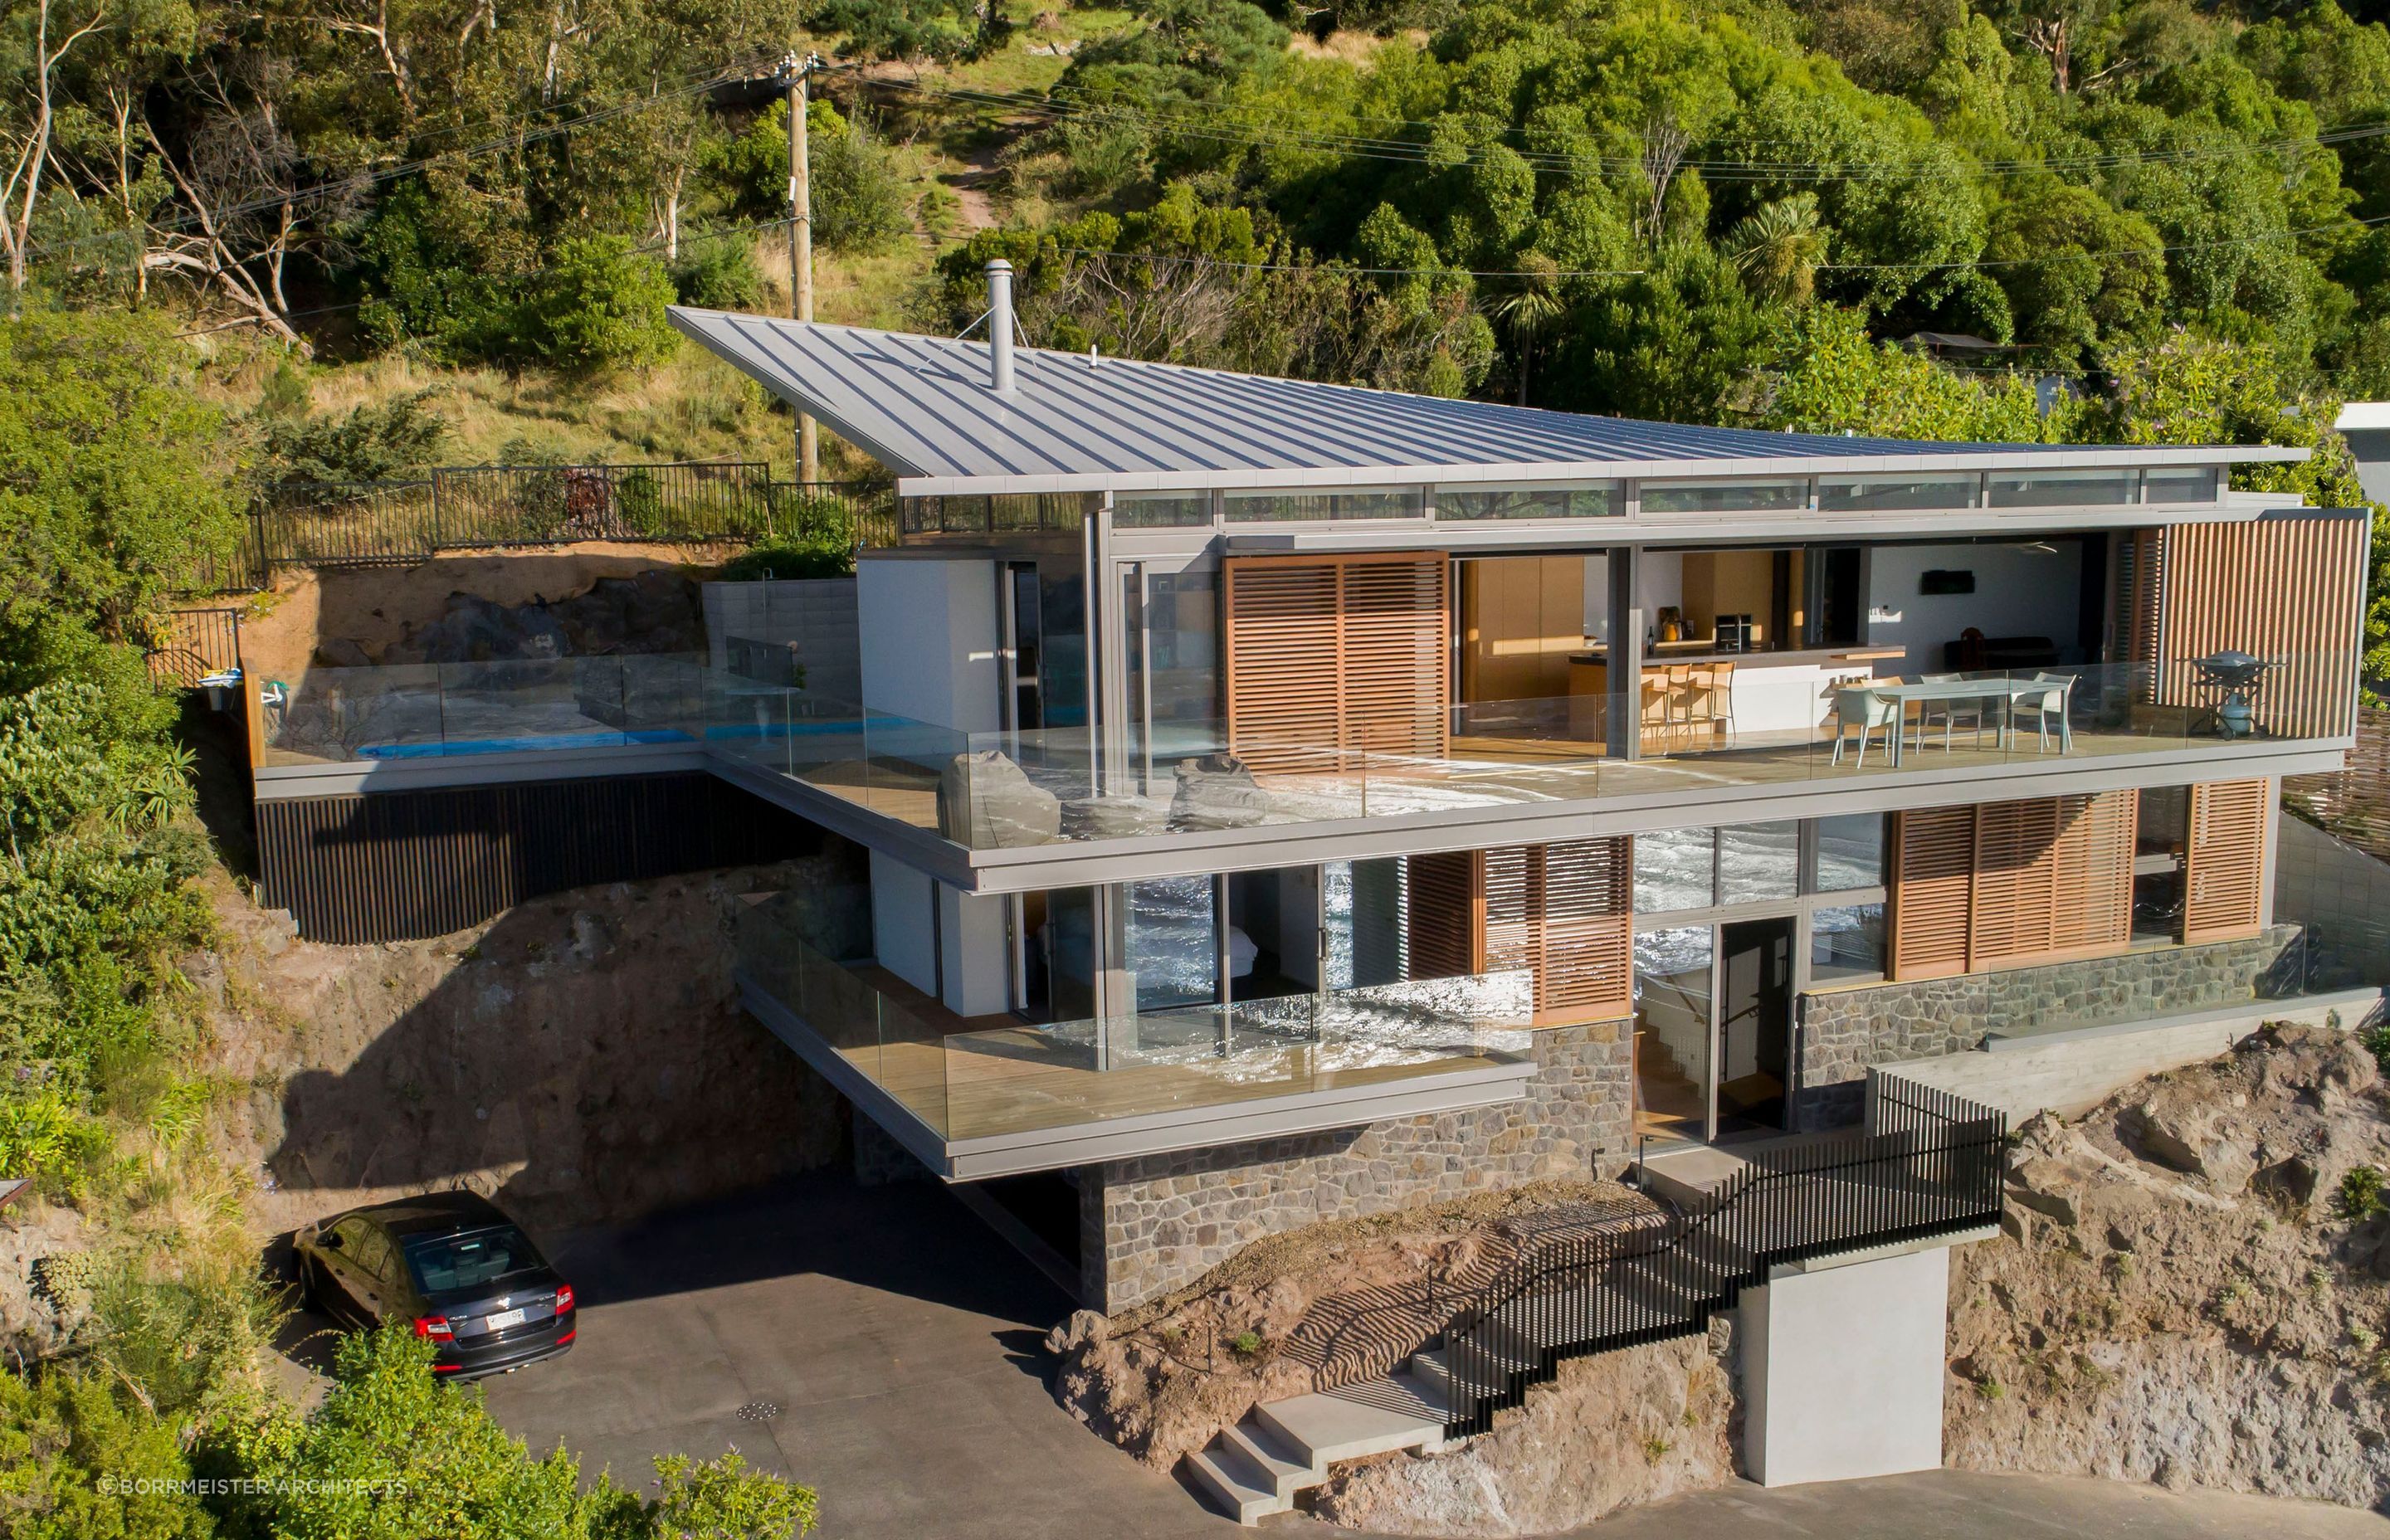 Red Rock House by Borrmeister Architects was designed to provide shelter from the prevailing winds, incorporate natural cross ventilation, solar panels, rainwater retention tanks and an ultra-low emission logburner.